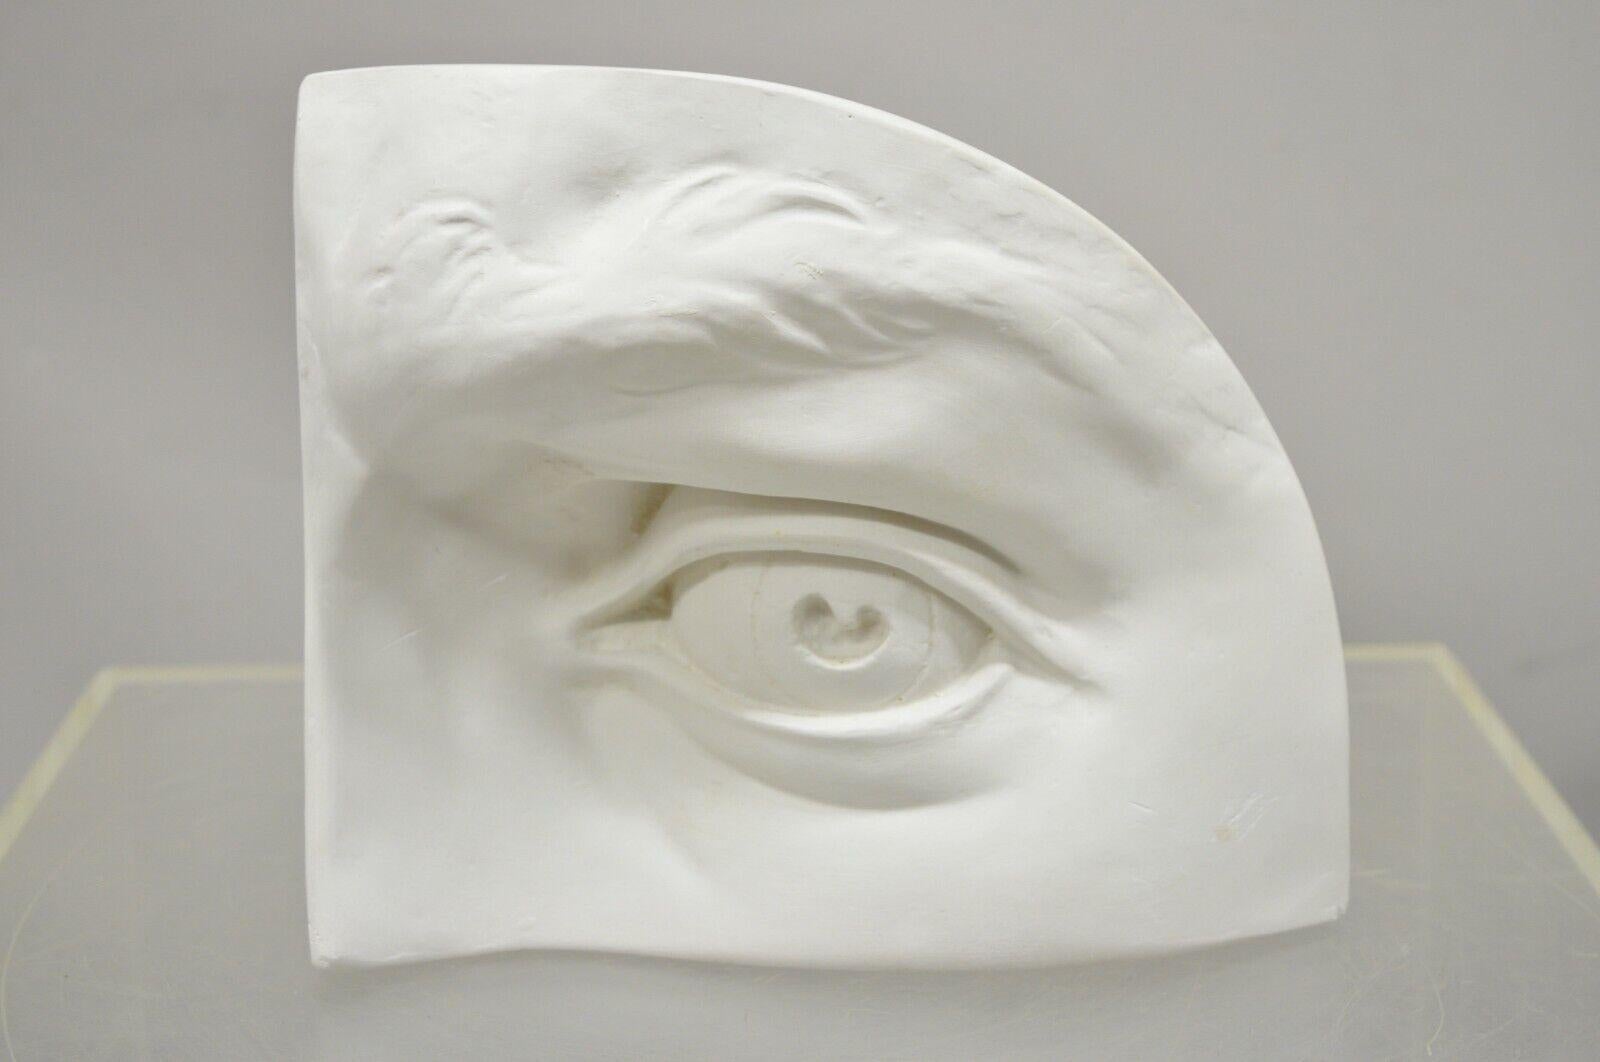 Italian modern eye of david cast plaster while bookend sculpture. Item featuers original stamp, very nice vintage item, clean Modernist lines, molded plaster form, in the Fornasetti style. Circa late 20th - early 21st century. Measurements: 8